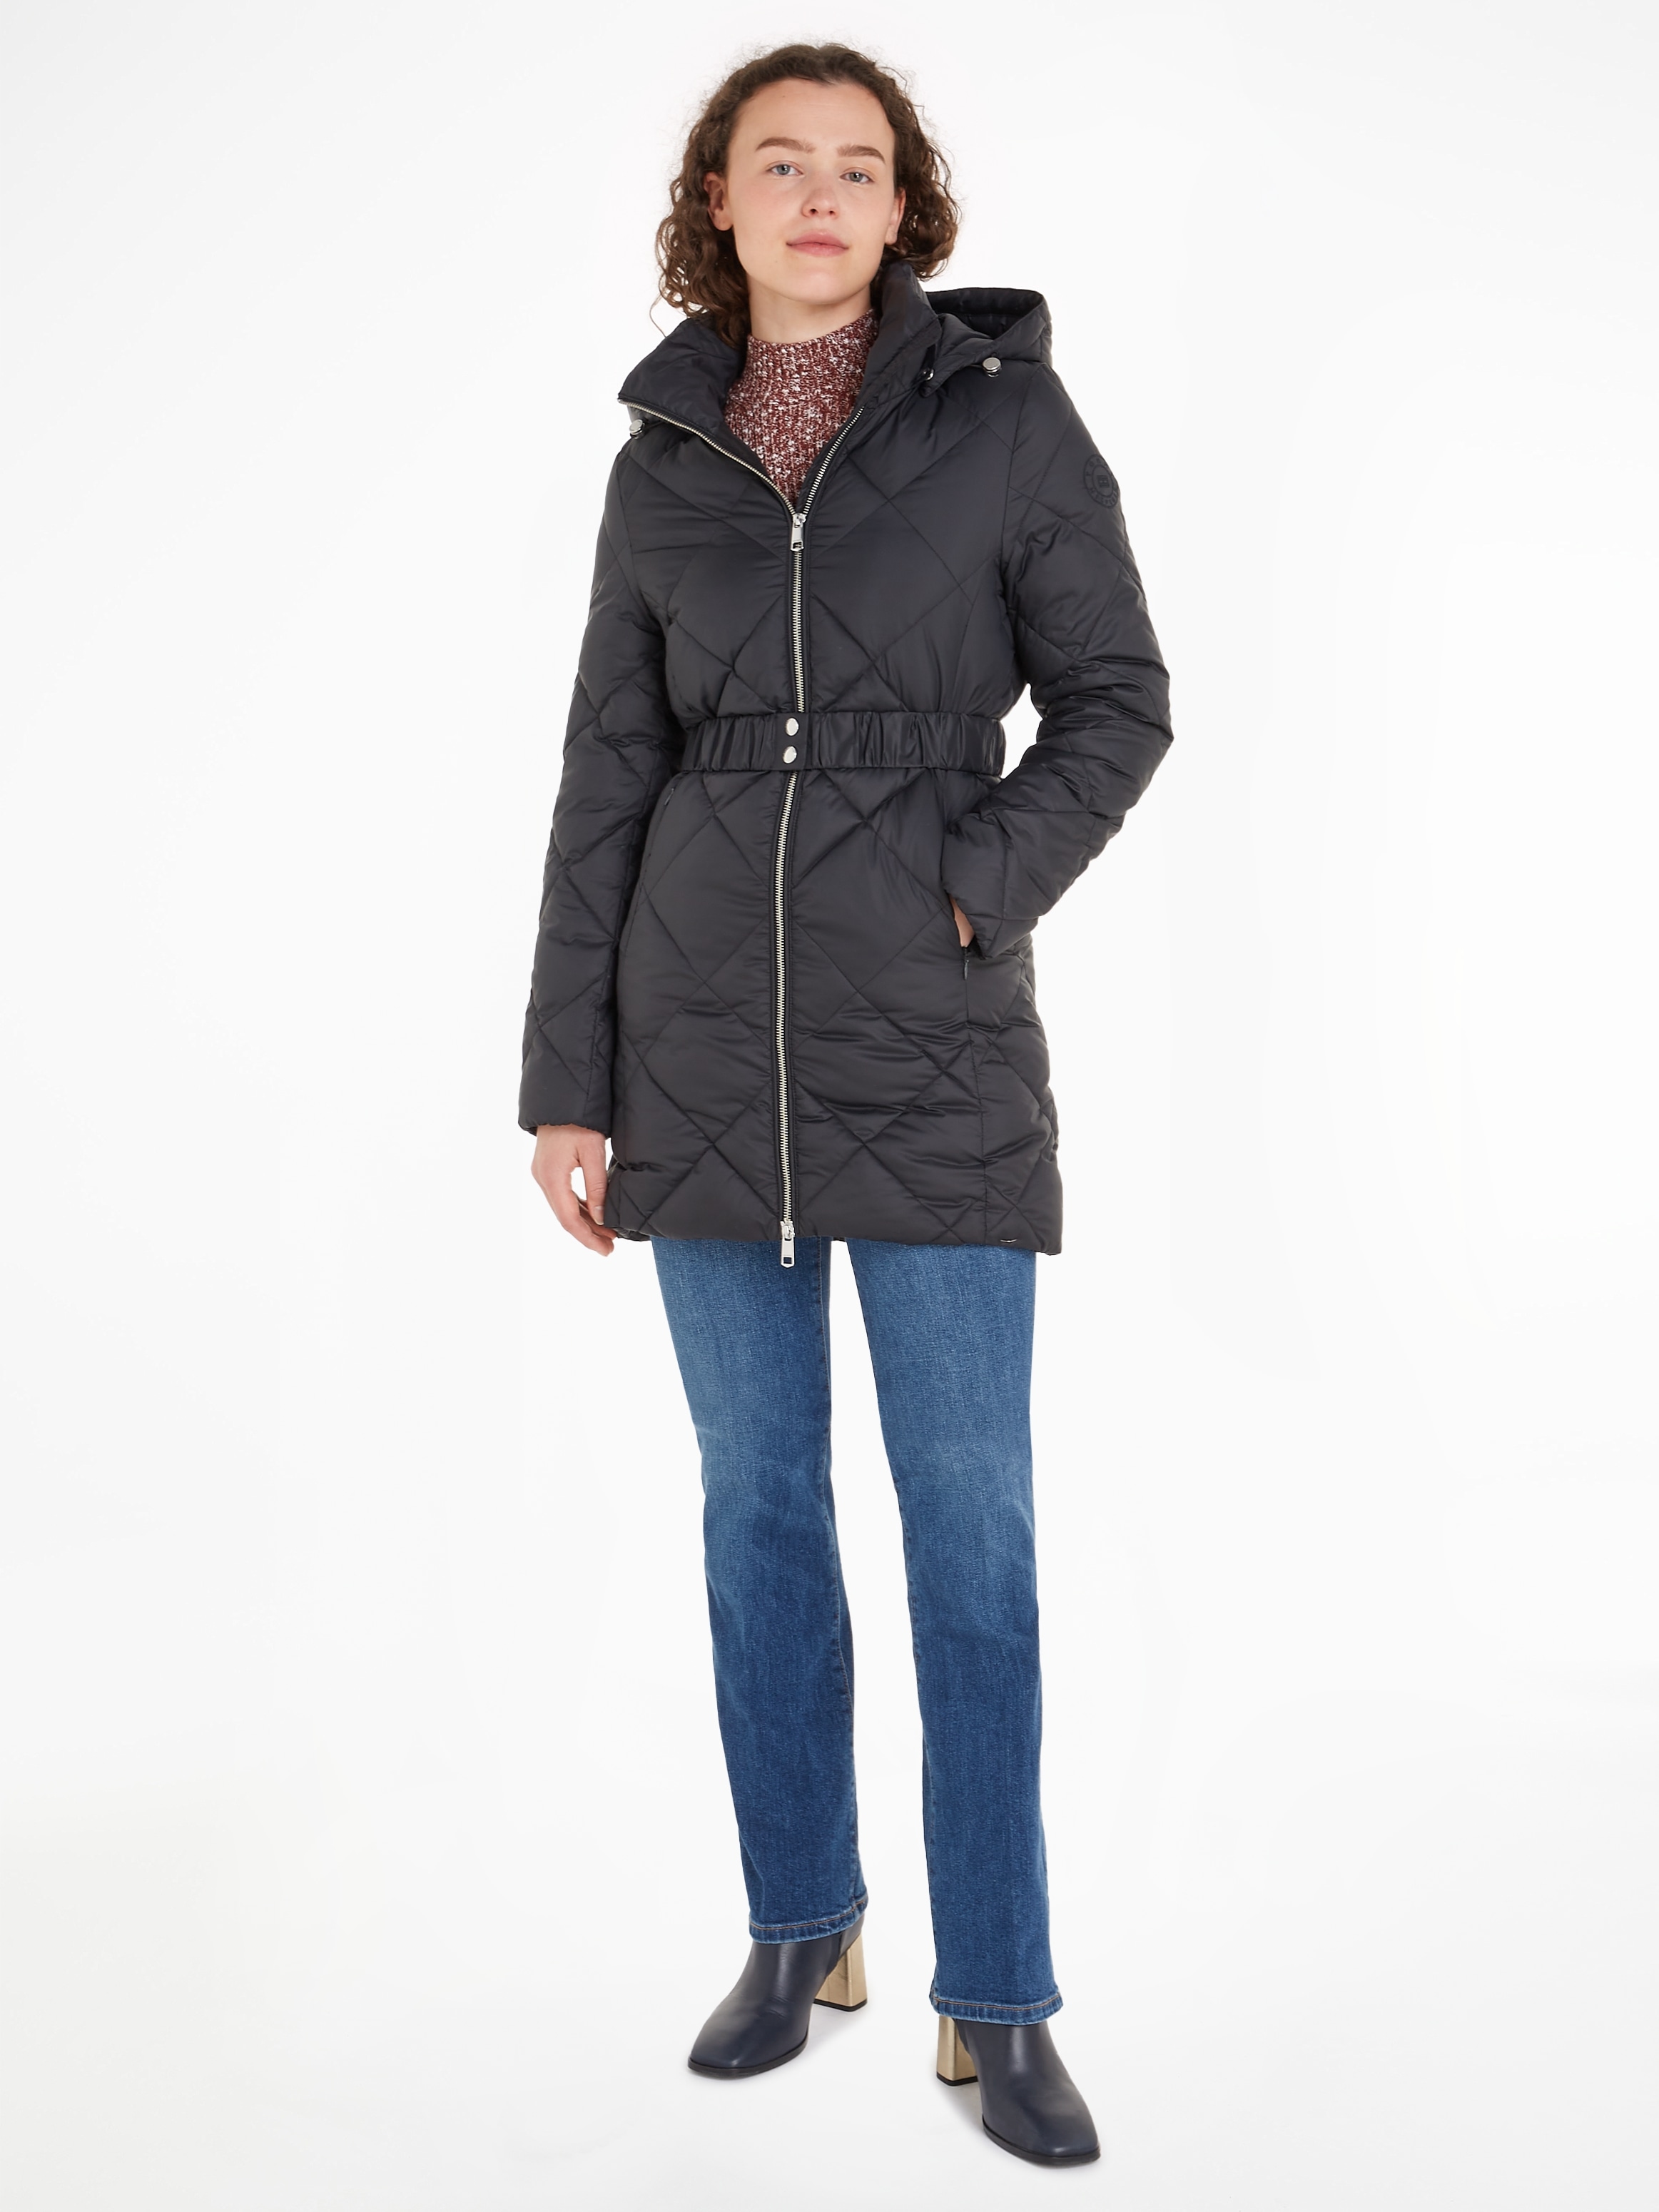 Hilfiger BELTED QUILTED Kapuze COAT«, Steppmantel Tommy abnehmbarer kaufen »ELEVATED mit